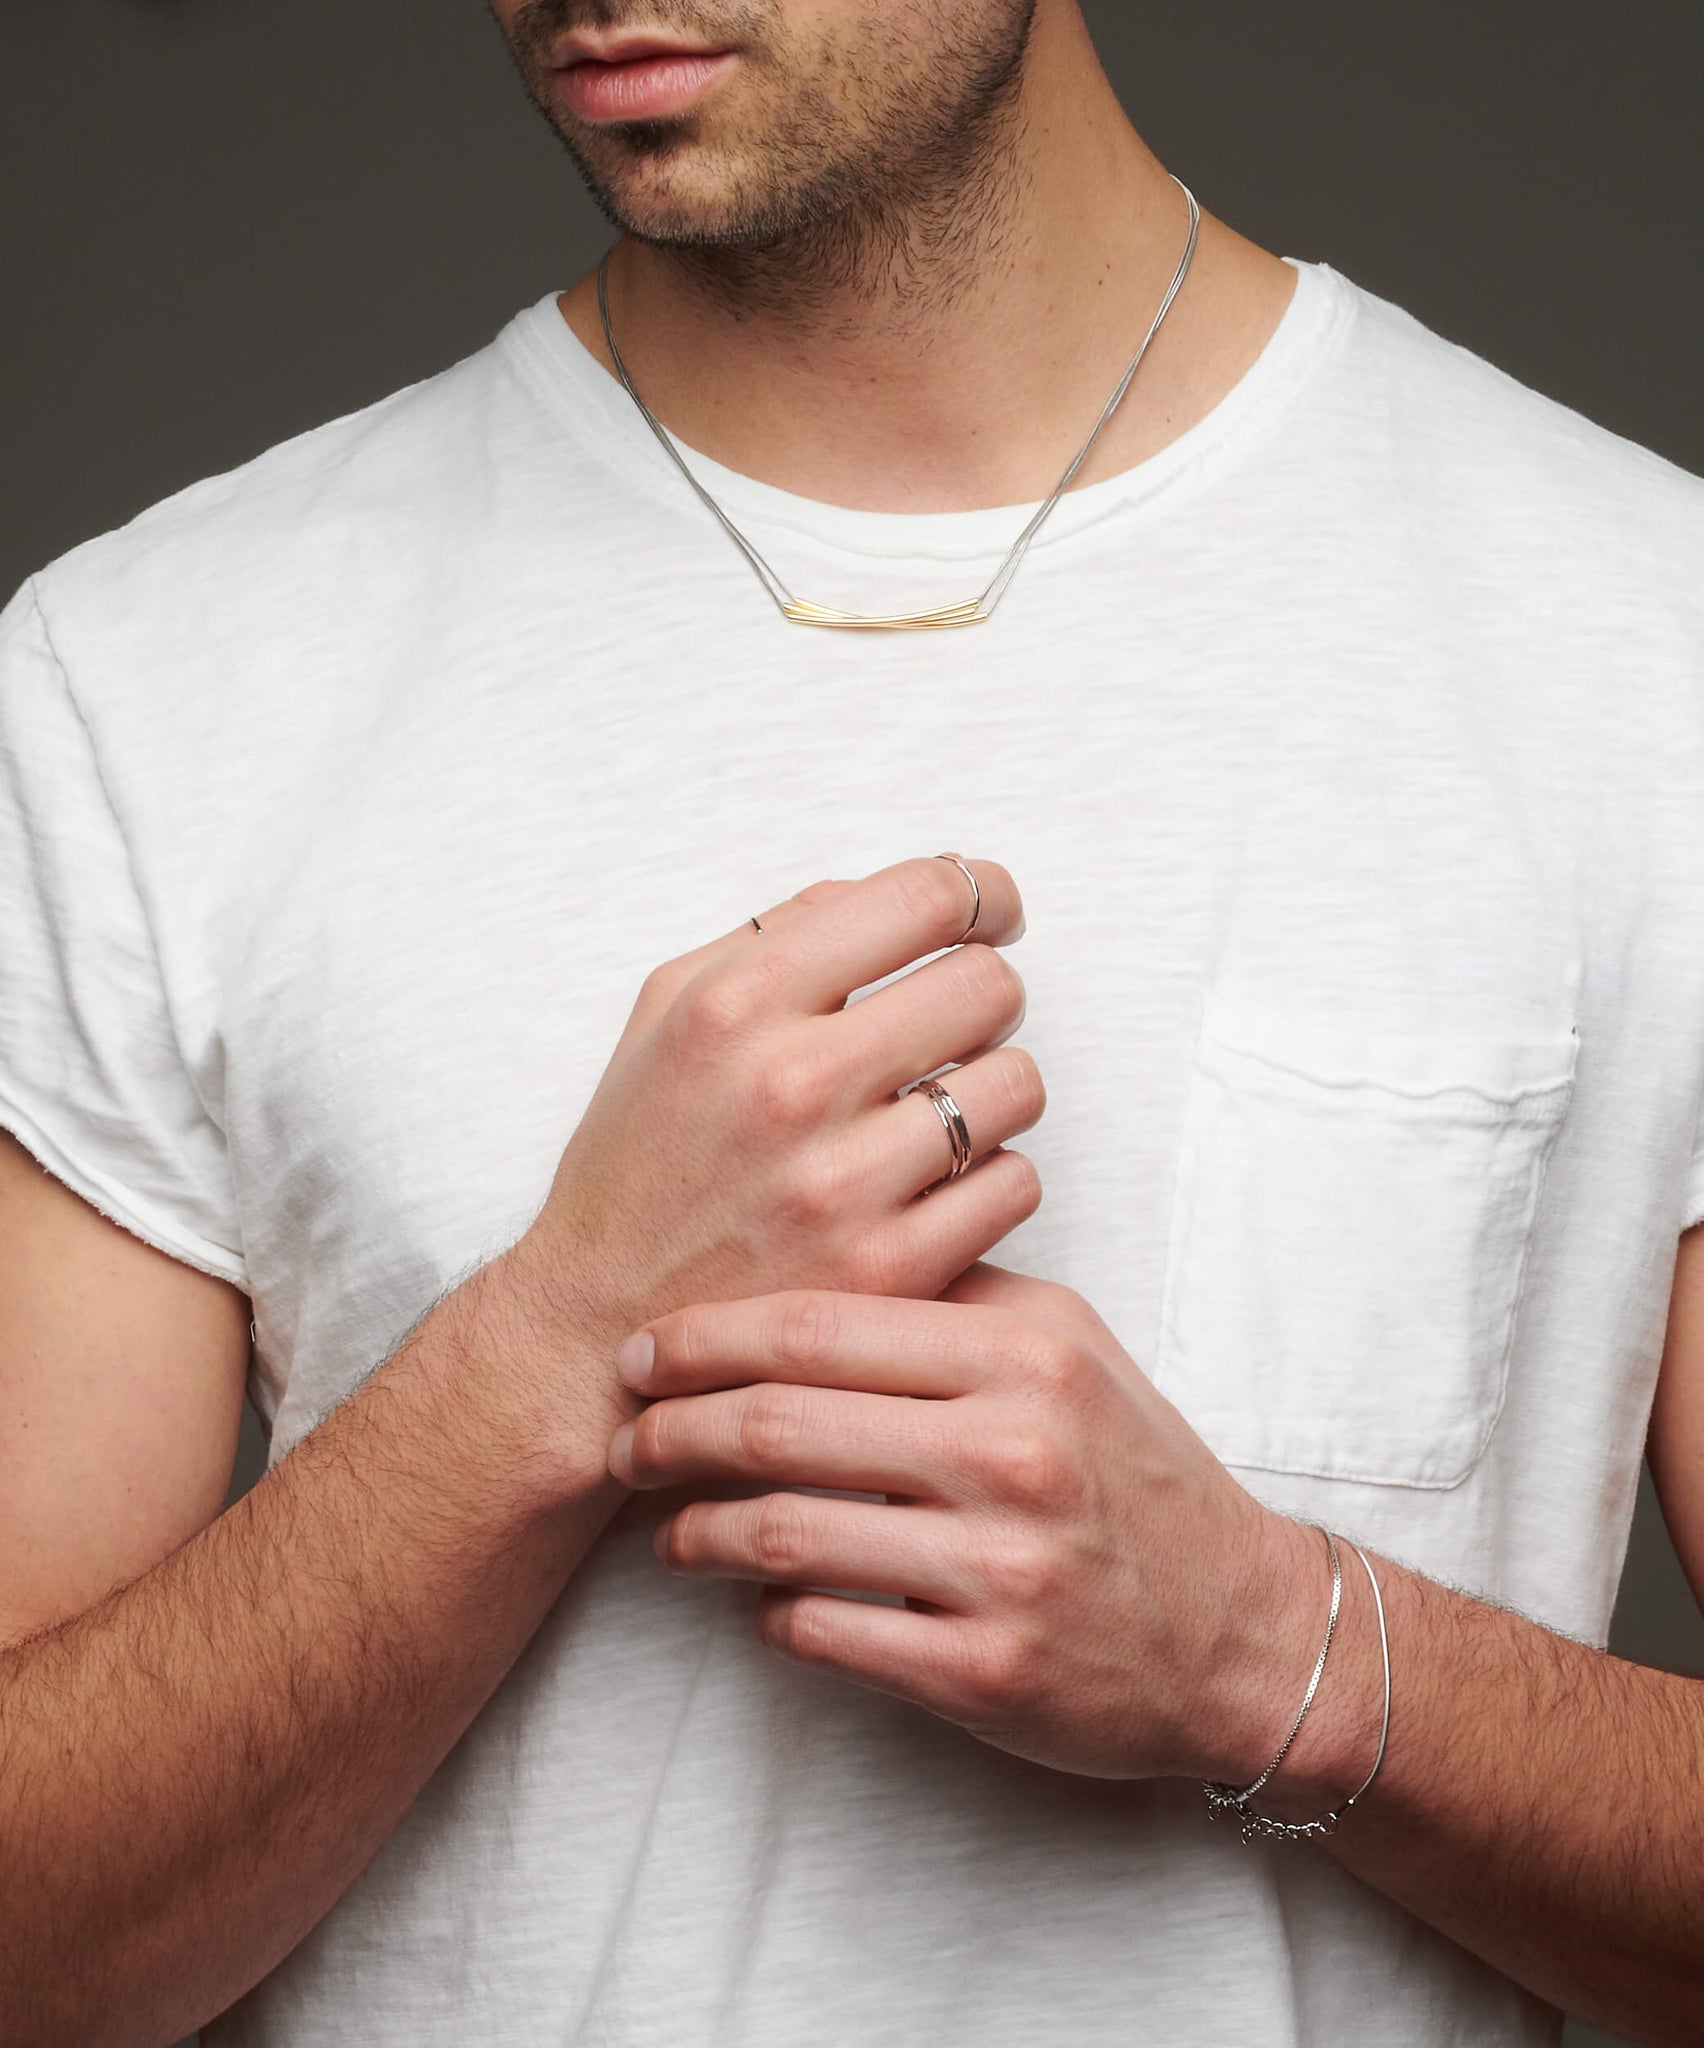 Man's torso with hands together wearing multiple pieces of jewelry including silver atelium bracelet, silver rings, and necklace